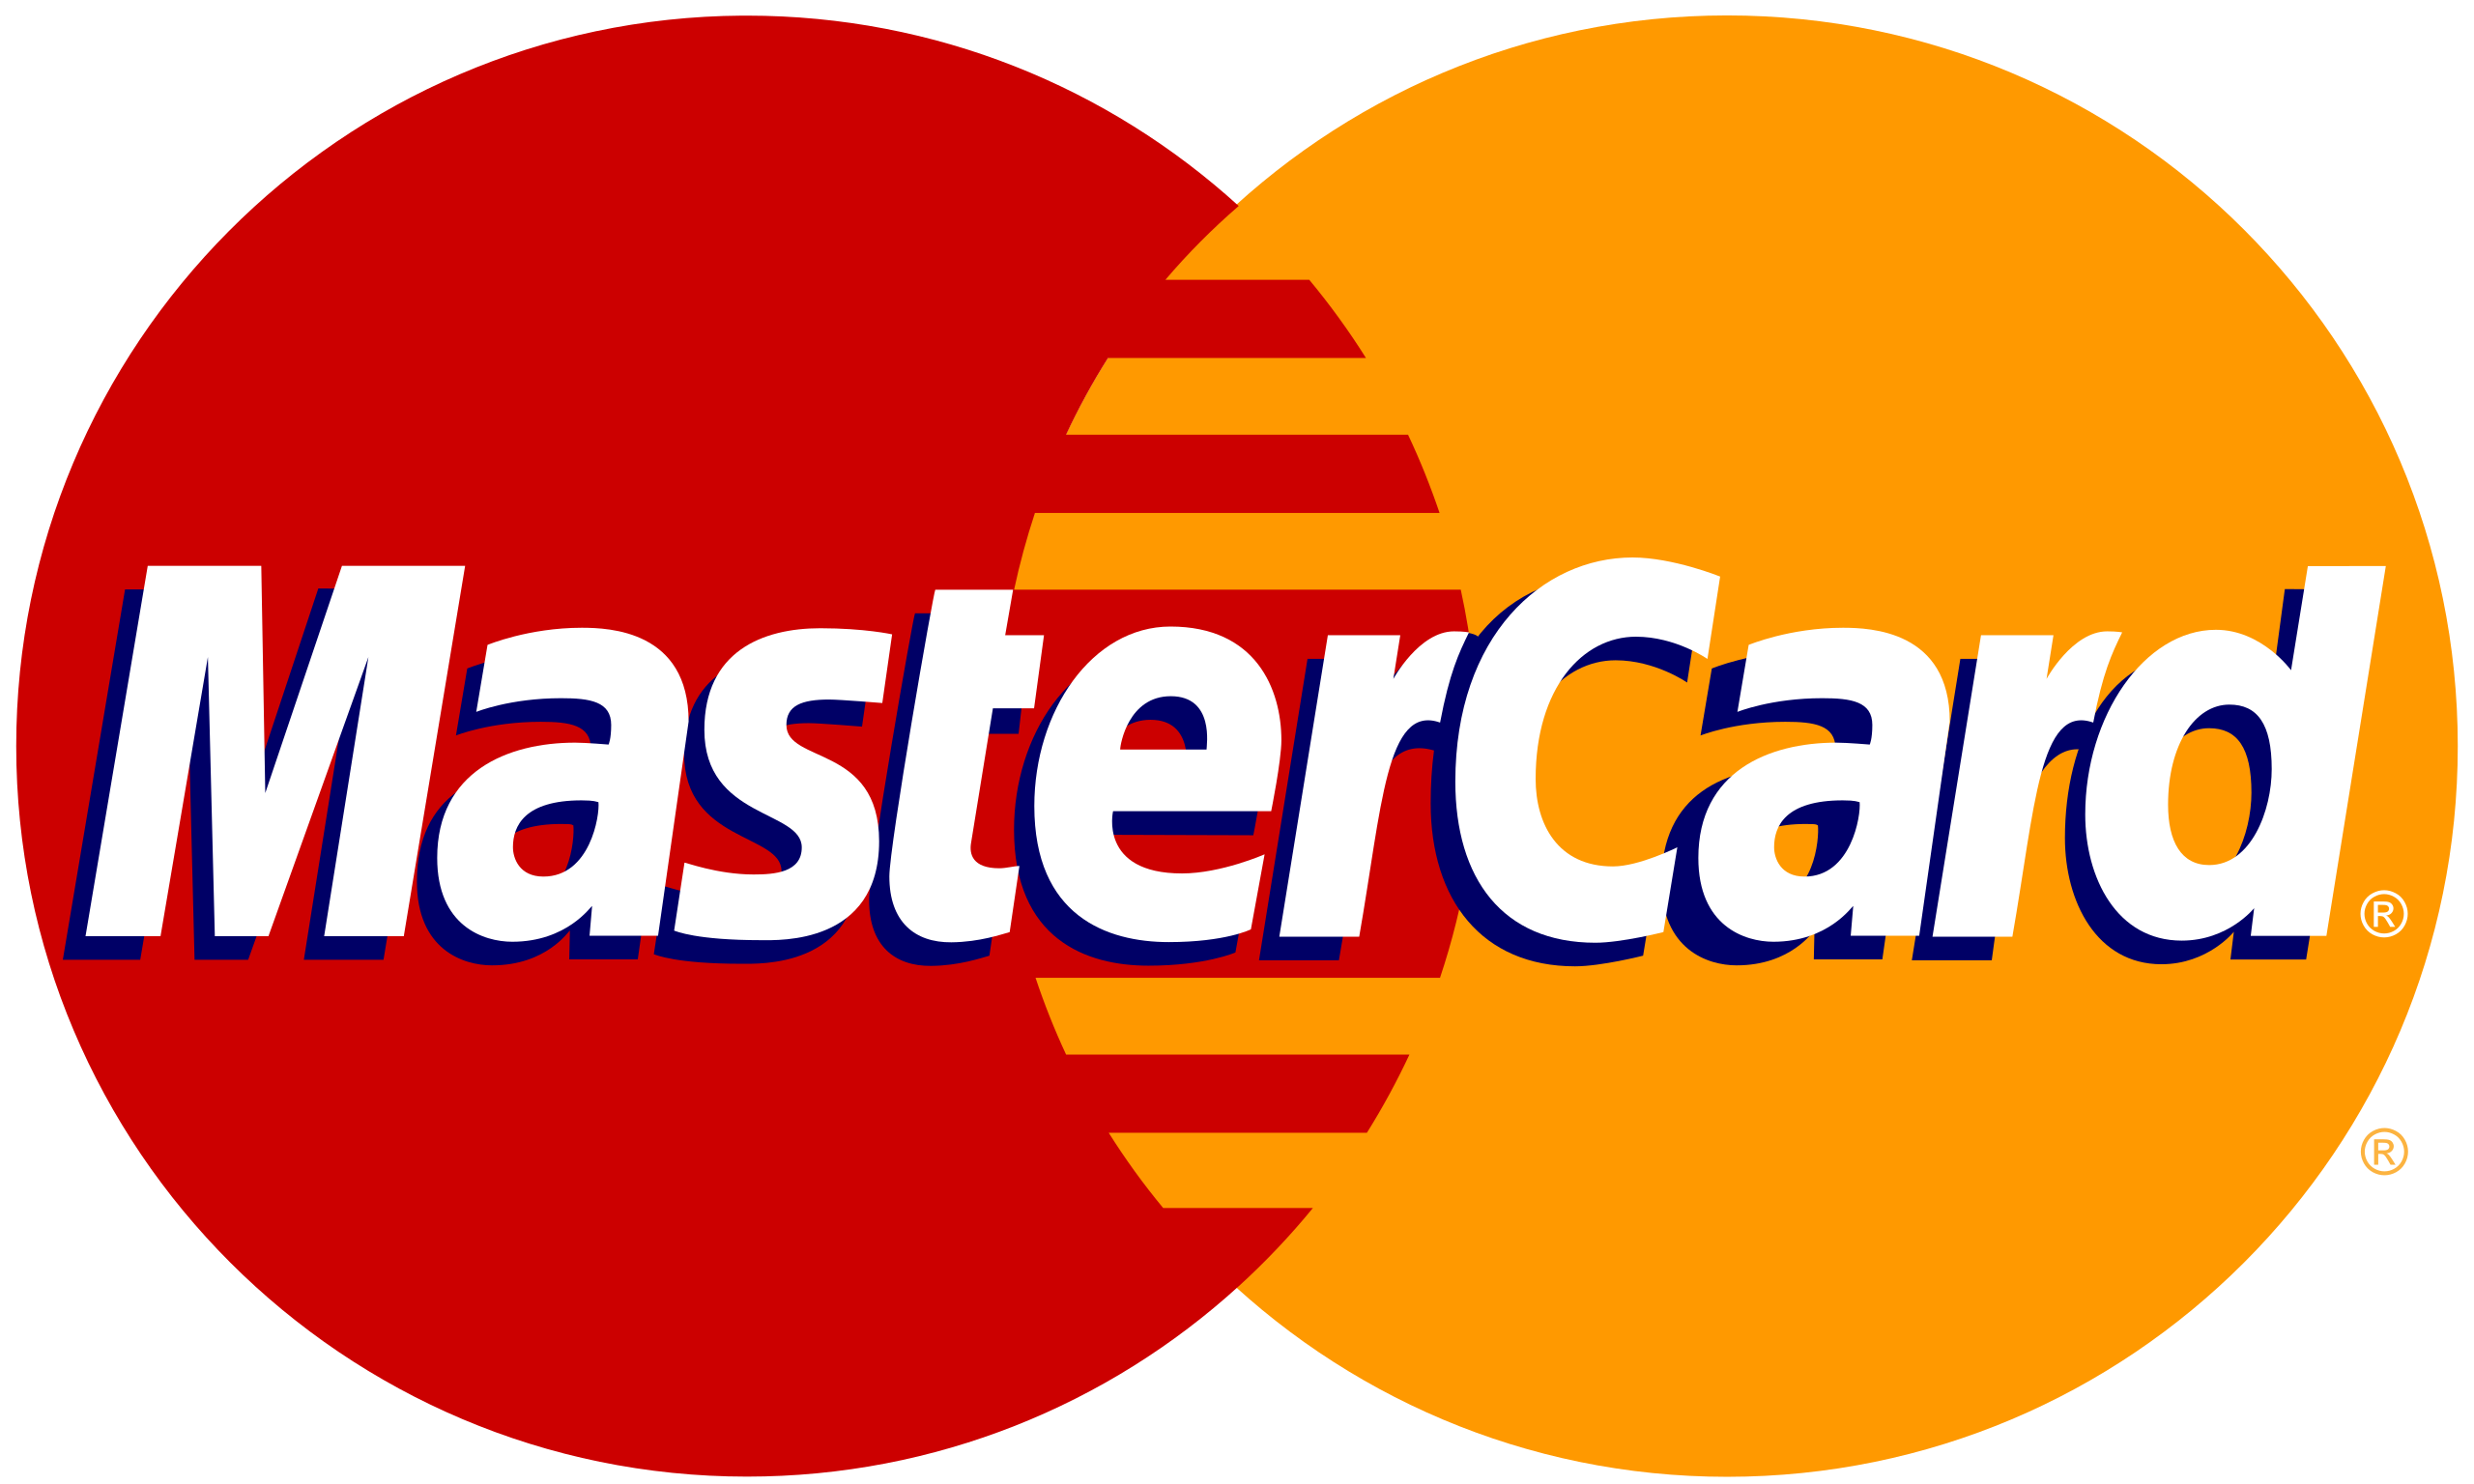 https://demo3.appmena.co/images/mastercard.png